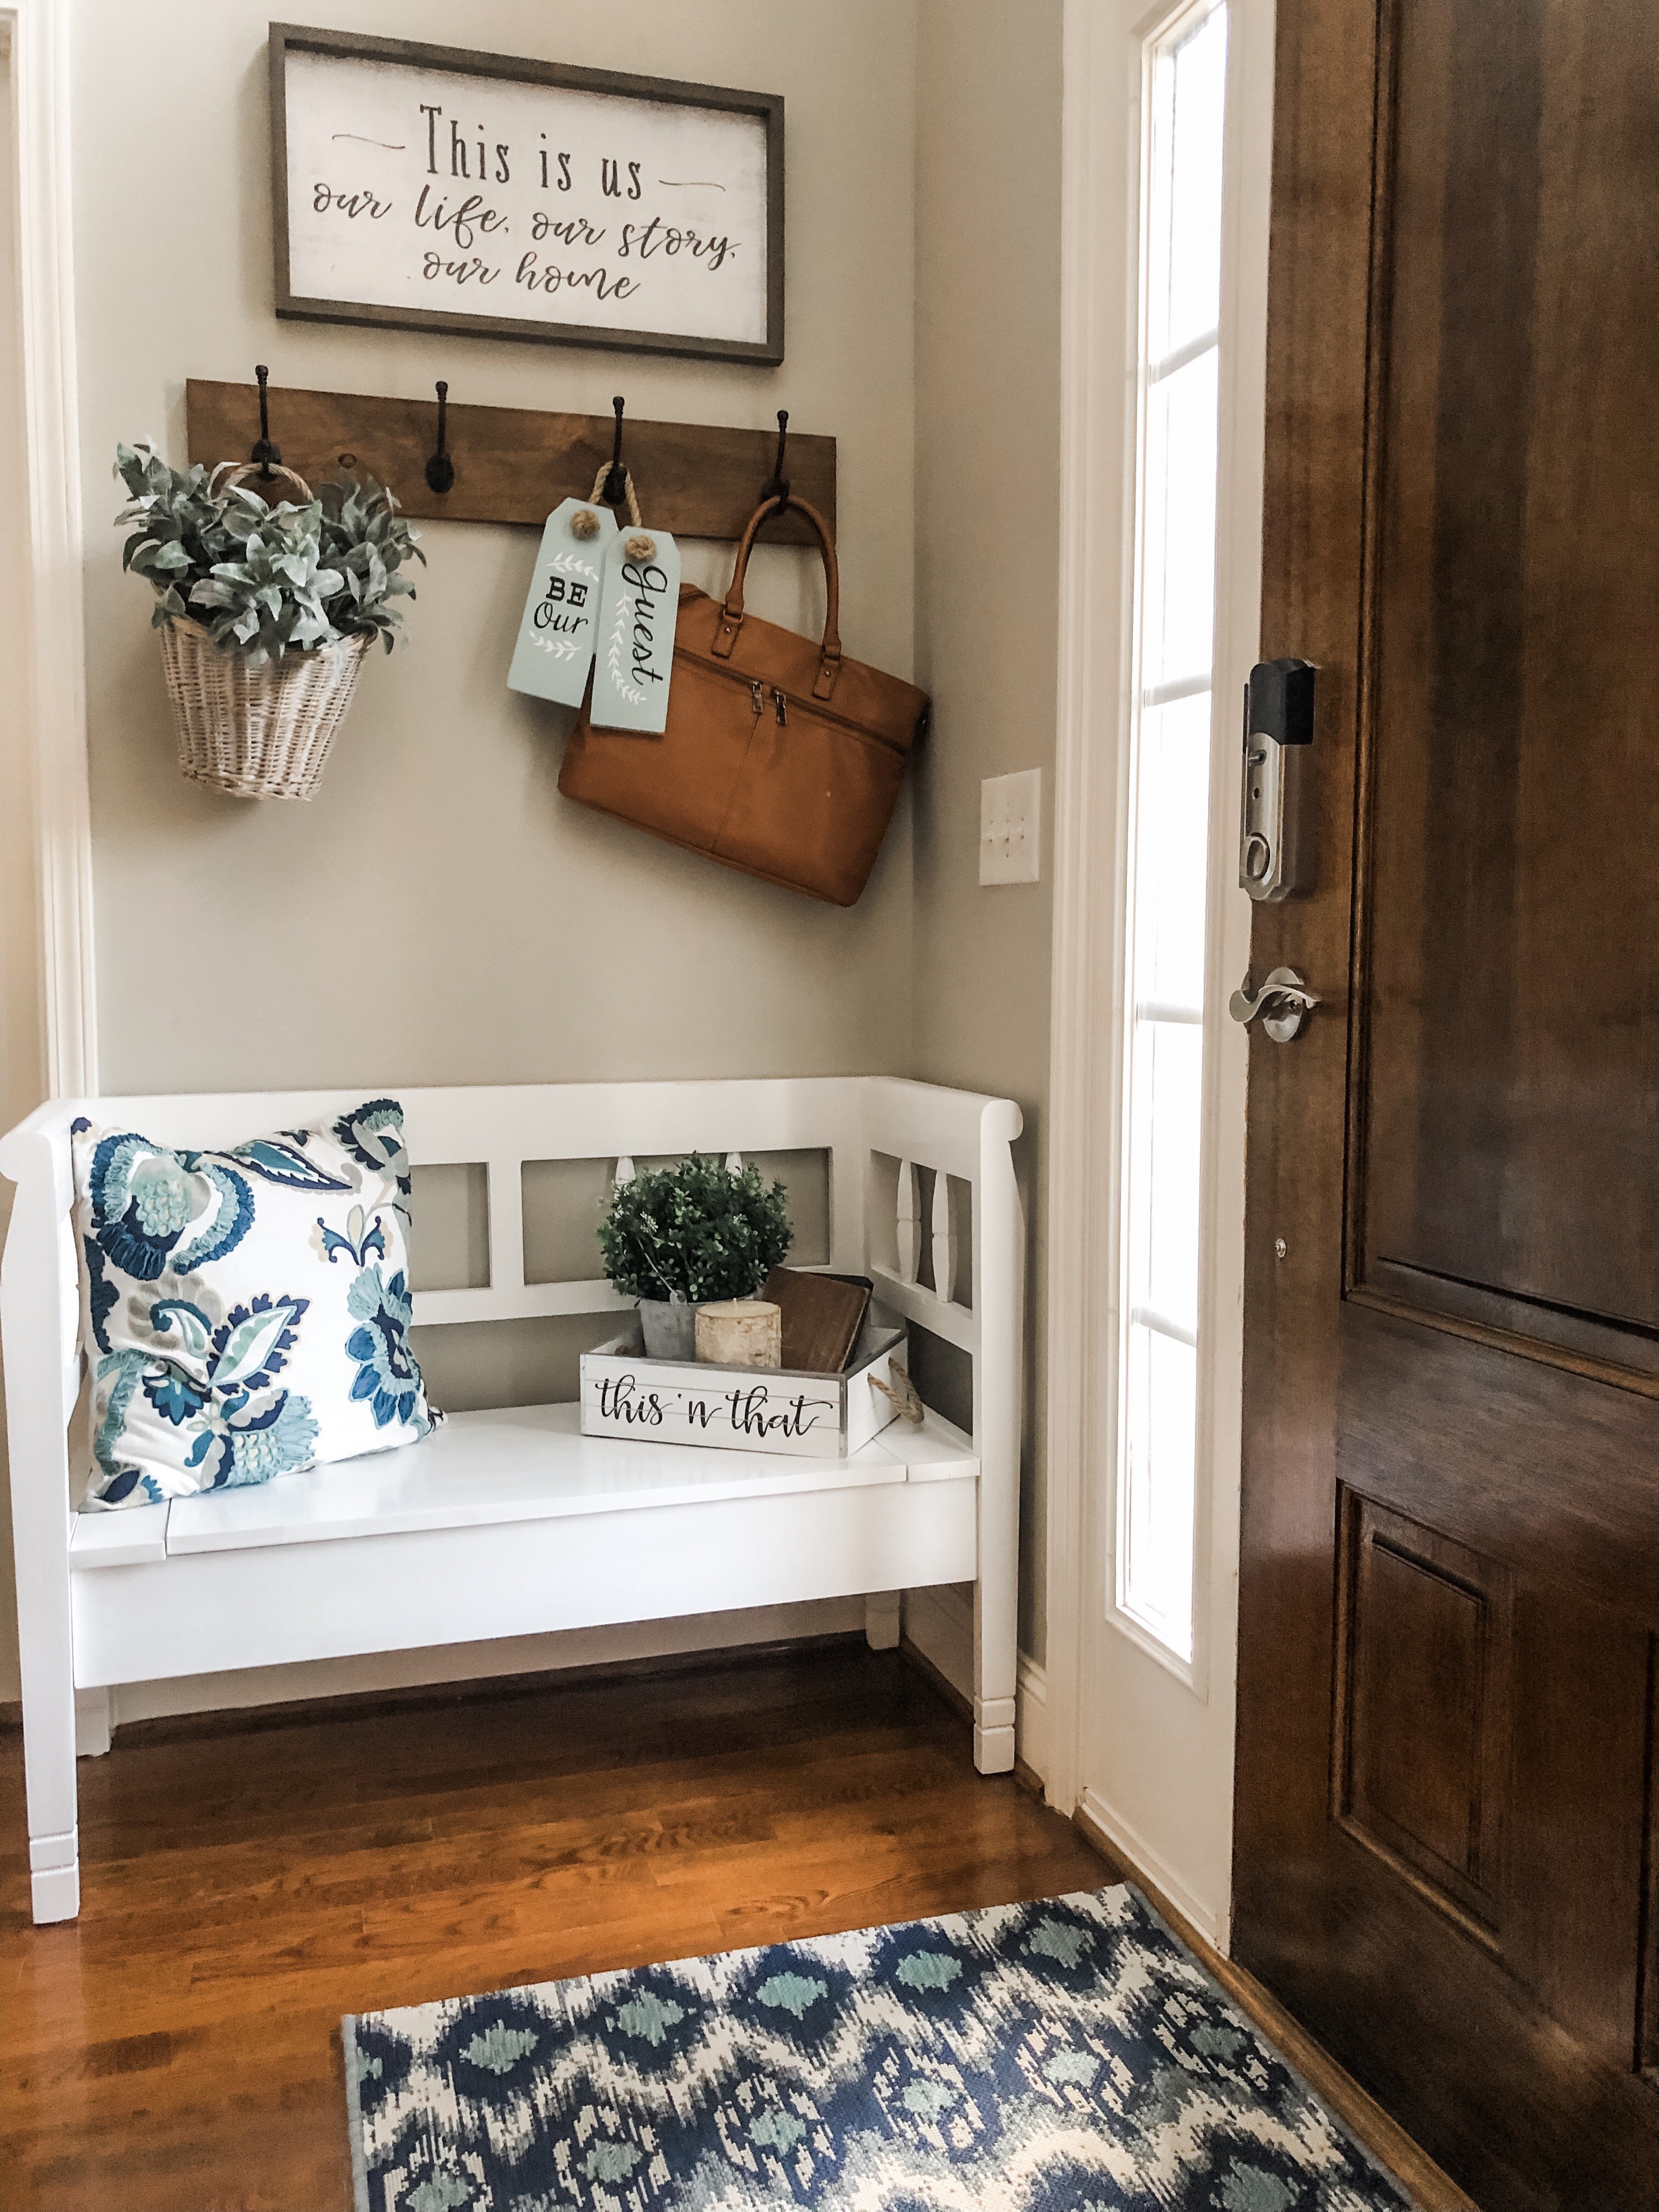 Entry way decorating ideas with a bench, hooks and cute farmhouse decor